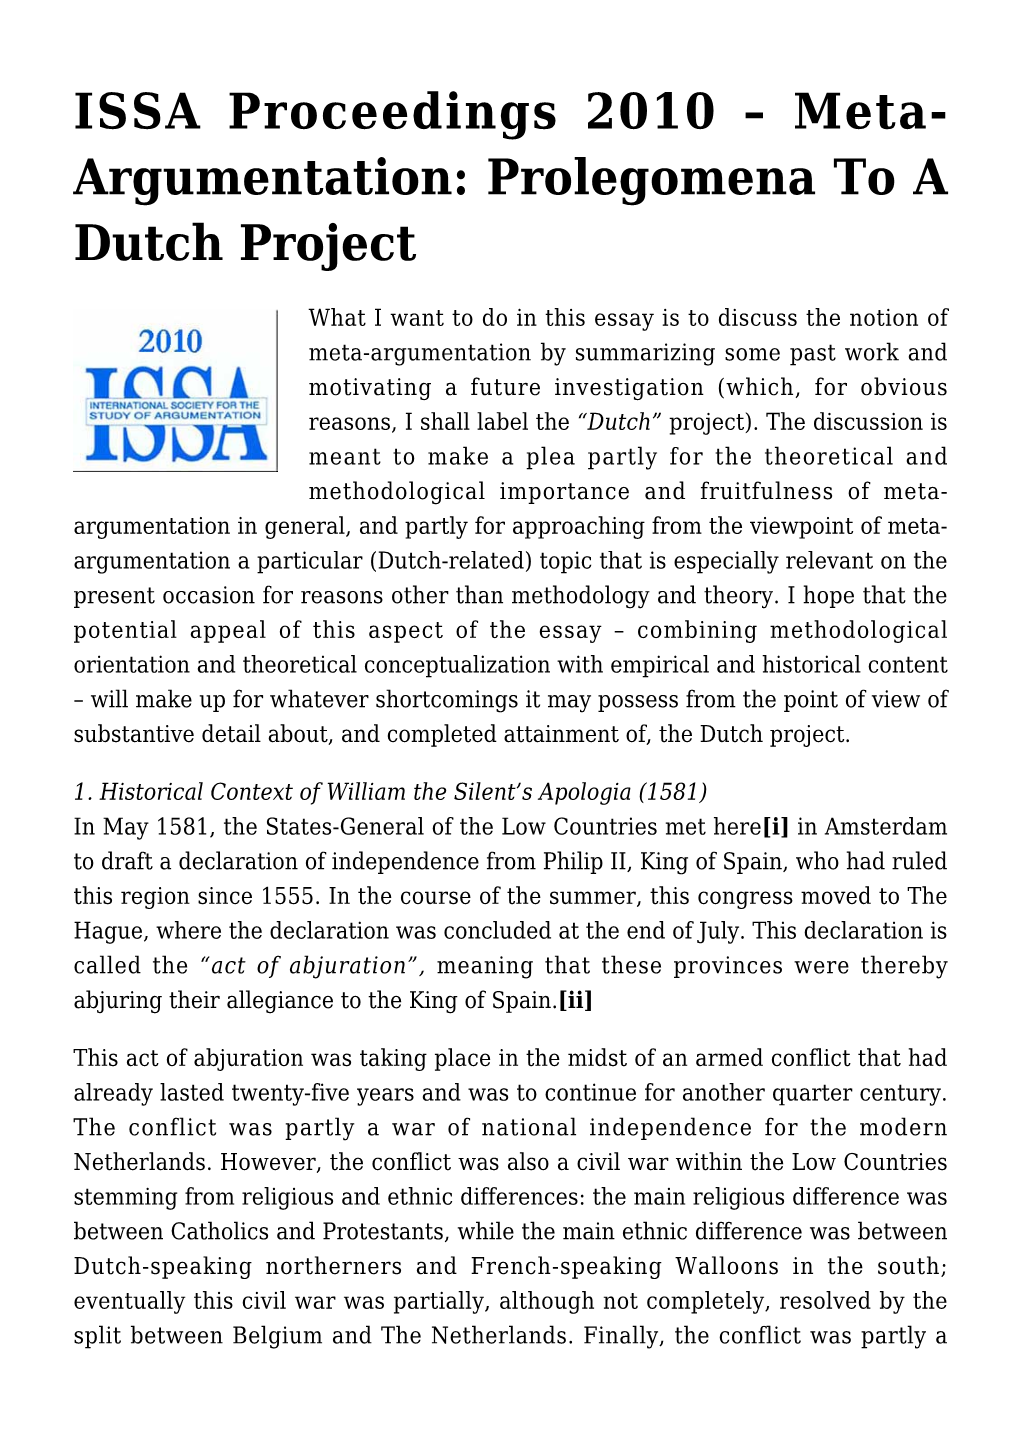 Meta-Argumentation by Summarizing Some Past Work and Motivating a Future Investigation (Which, for Obvious Reasons, I Shall Label the “Dutch” Project)